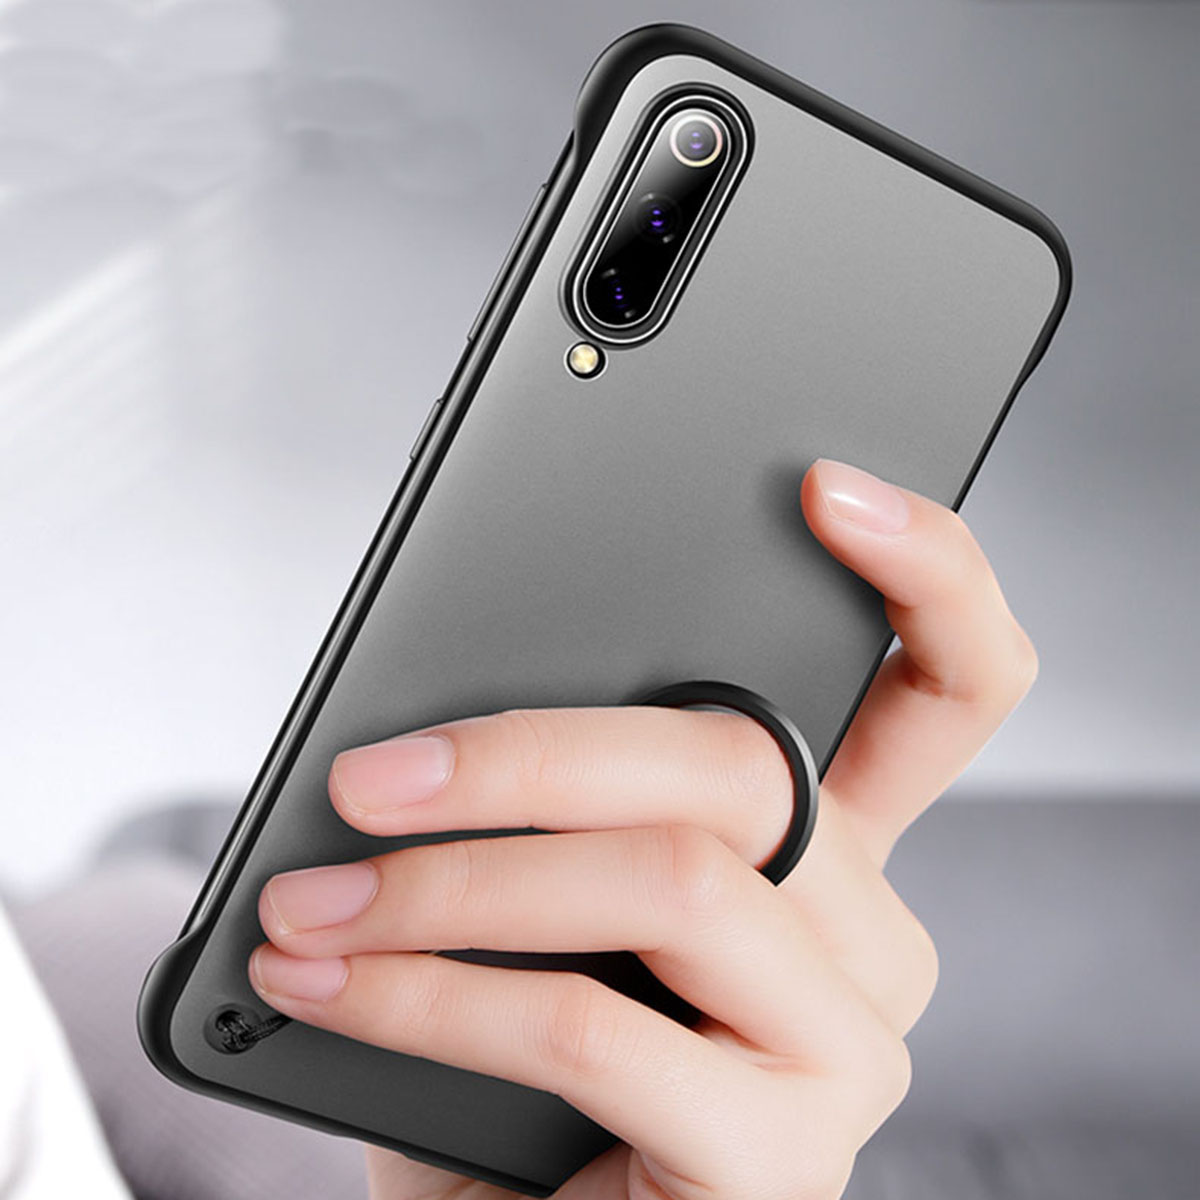 

Bakeey Transparent Ultra Thin Anti Fall Matte Hard PC&Soft Edge With Finger Ring Protective Case For Xiaomi Mi 9 / Mi9 Transparent Edition